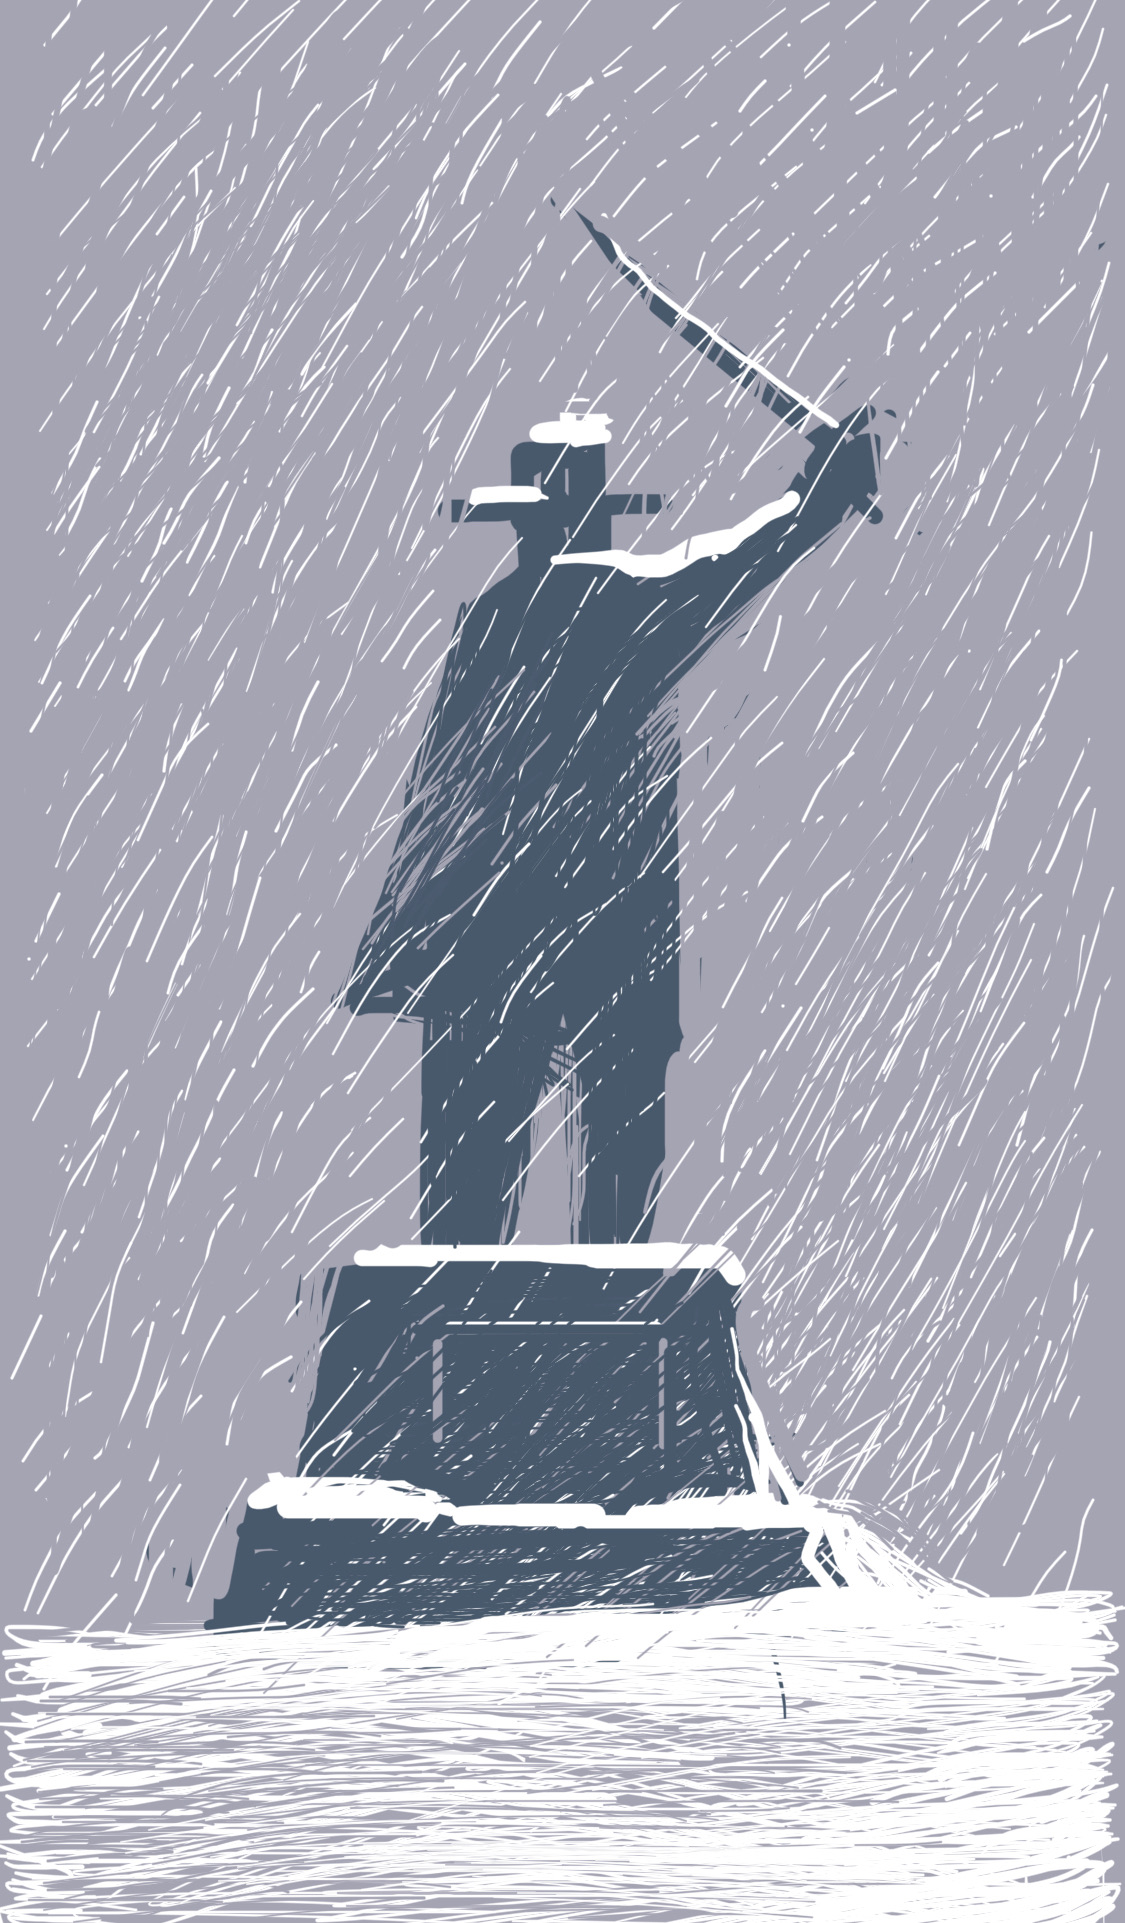 A statue holding up a sword stands in the middle of a blizzard